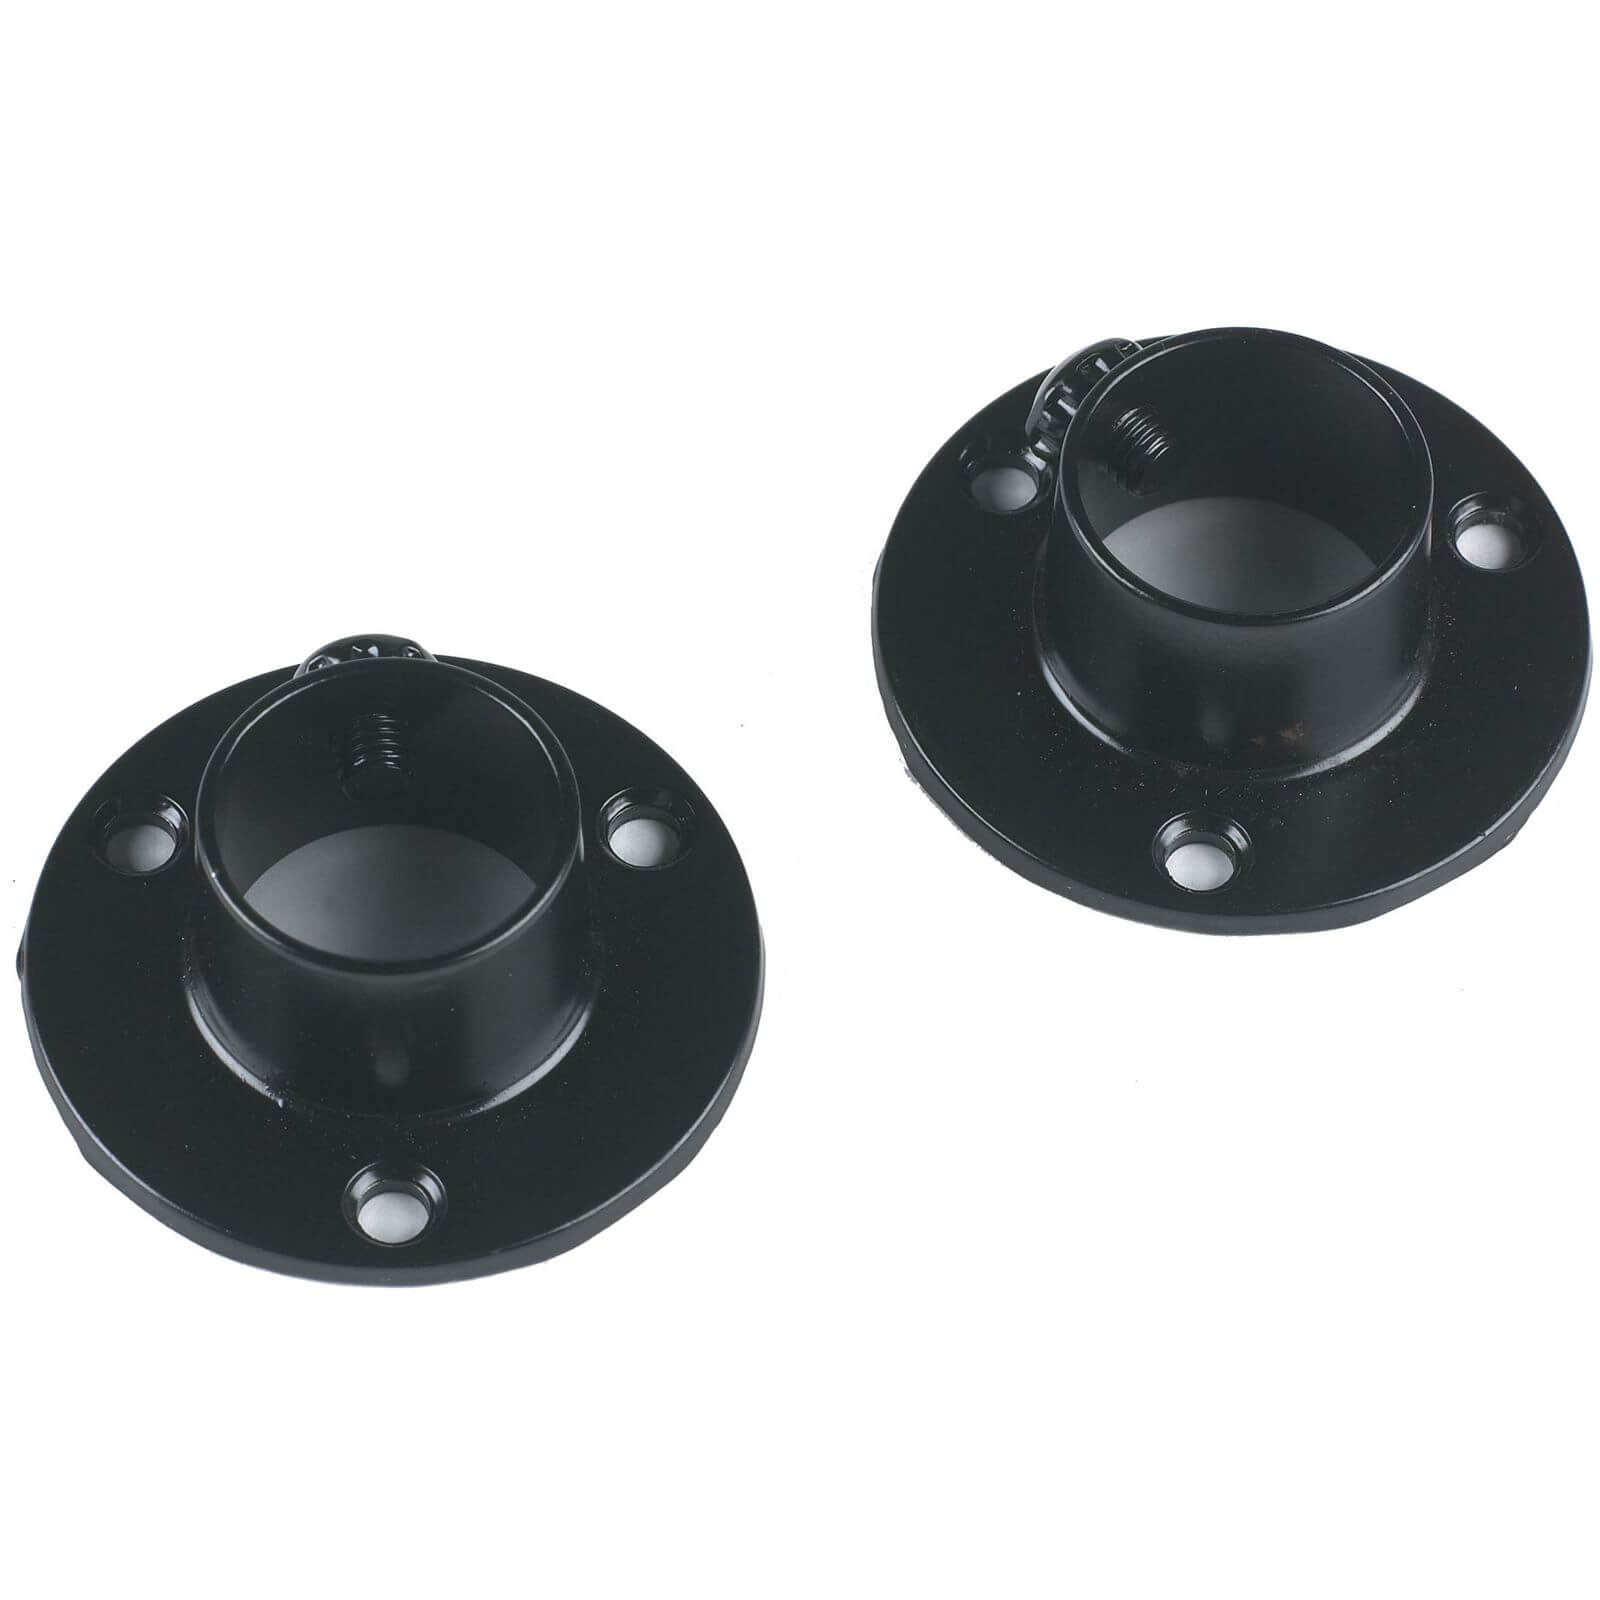 Photo of Super Deluxe Sockets - Black - 19mm